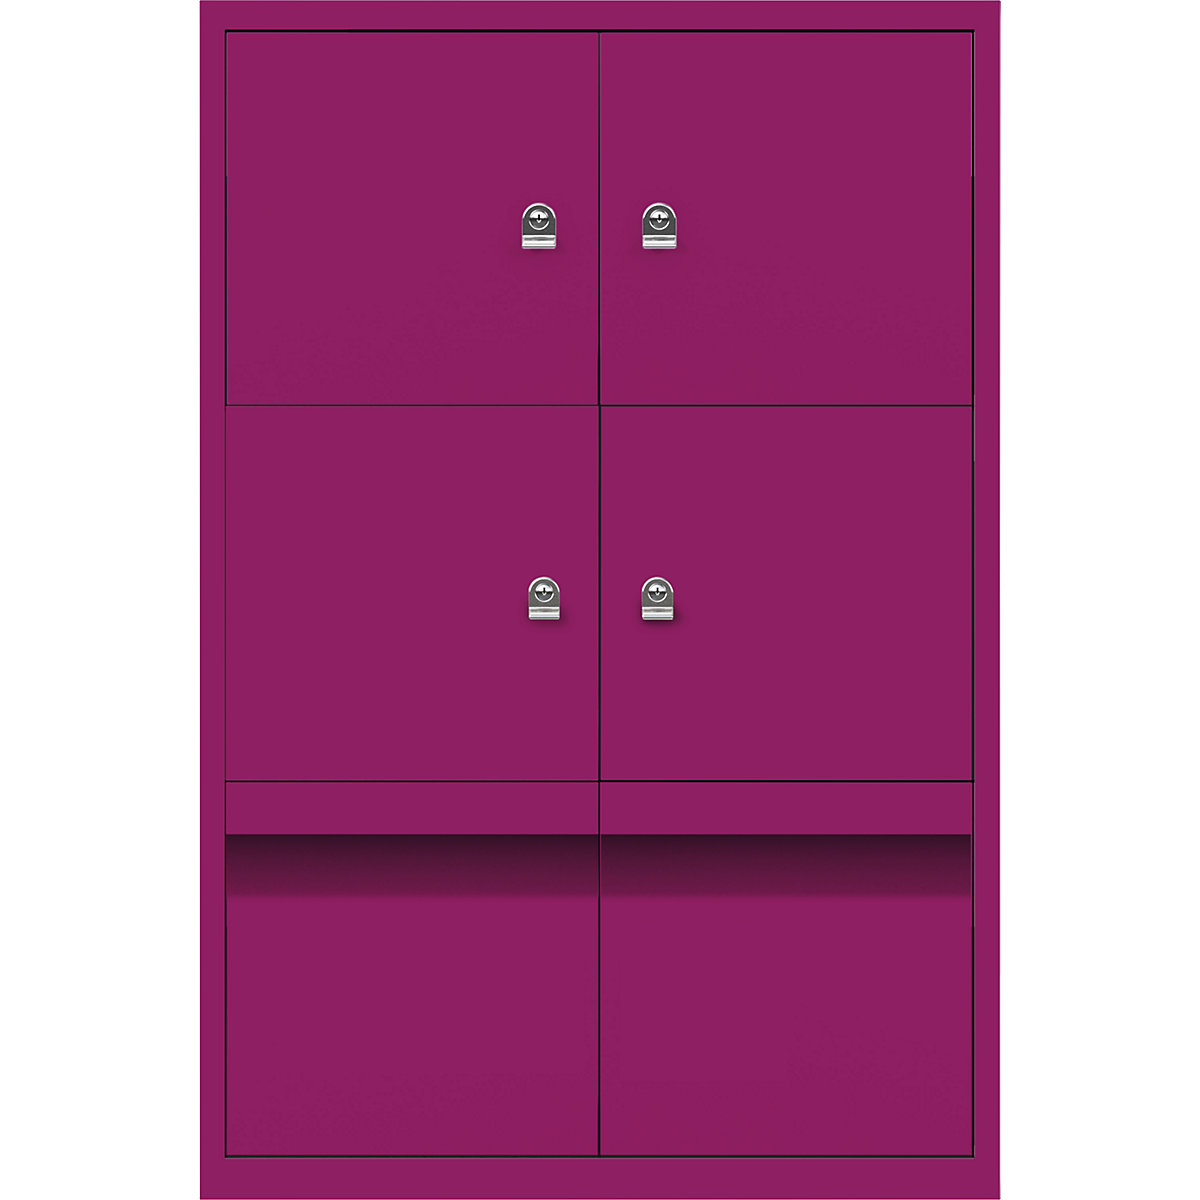 LateralFile™ lodge – BISLEY, with 4 lockable compartments and 2 drawers, height 375 mm each, fuchsia-4